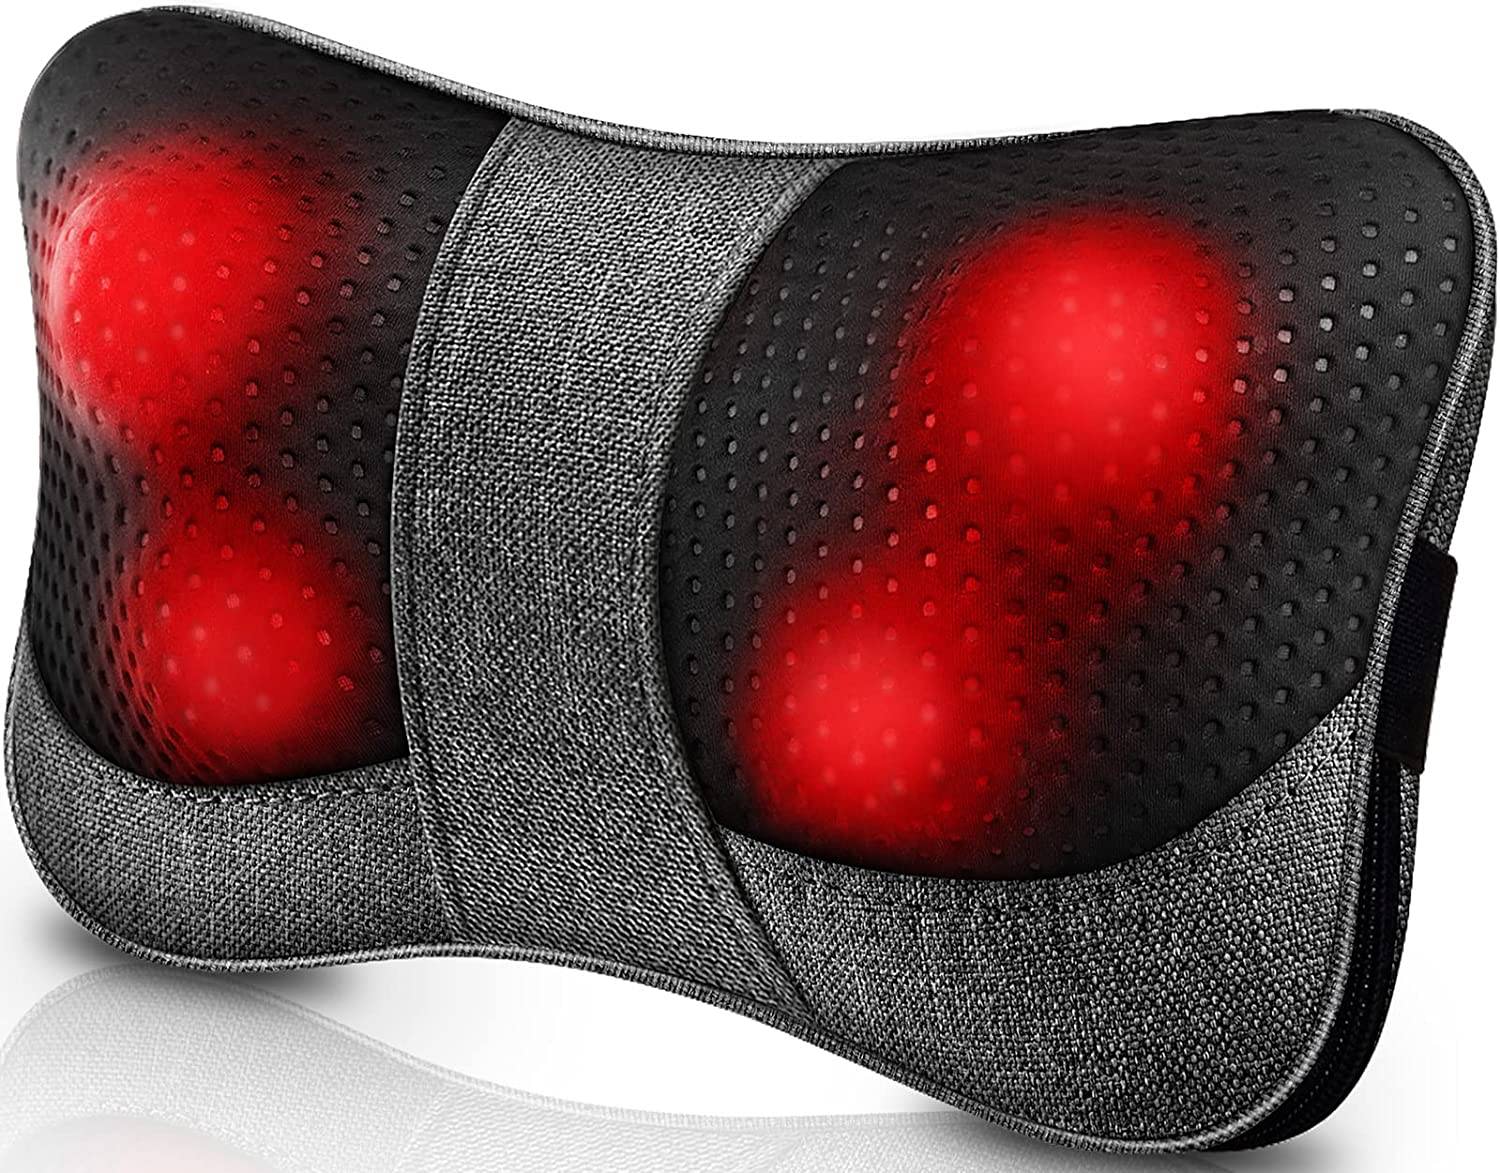 Edward Creation This neck massager will help you relax and ease muscle tension with its built-in heat function.